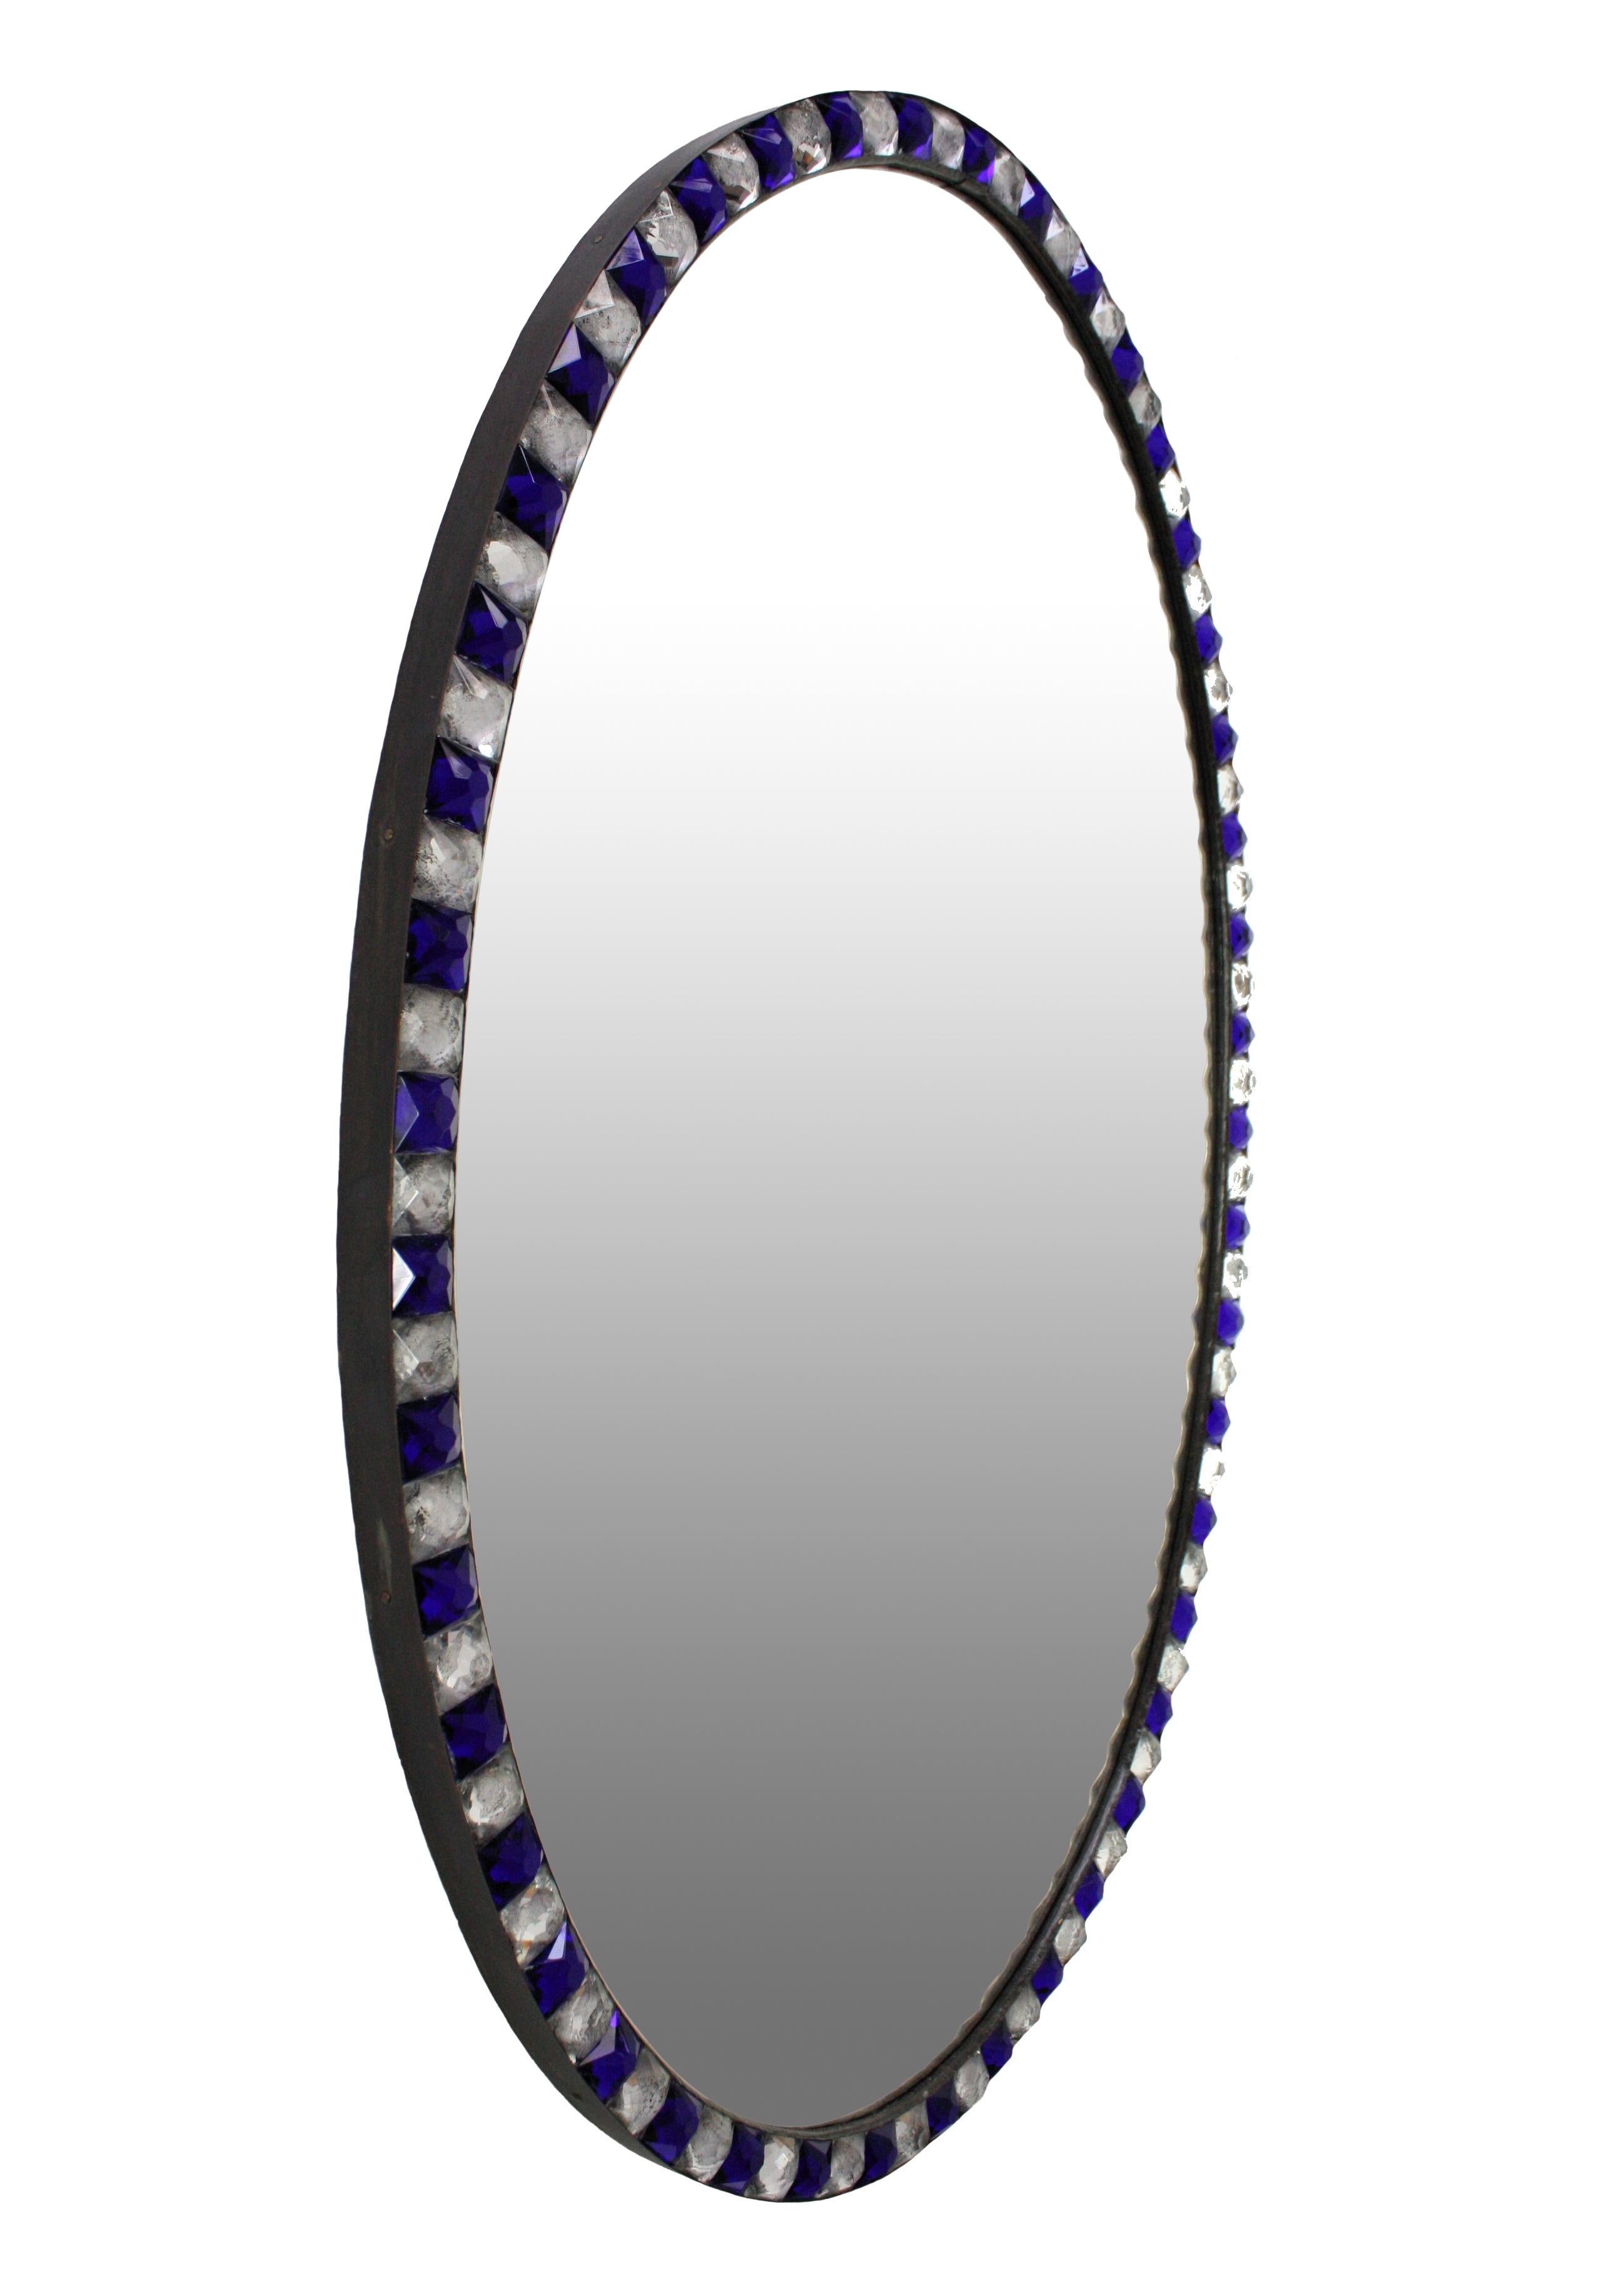 Pair of Stunning Irish Mirrors with Faceted Rock Crystal and Blu Glass Borders 3